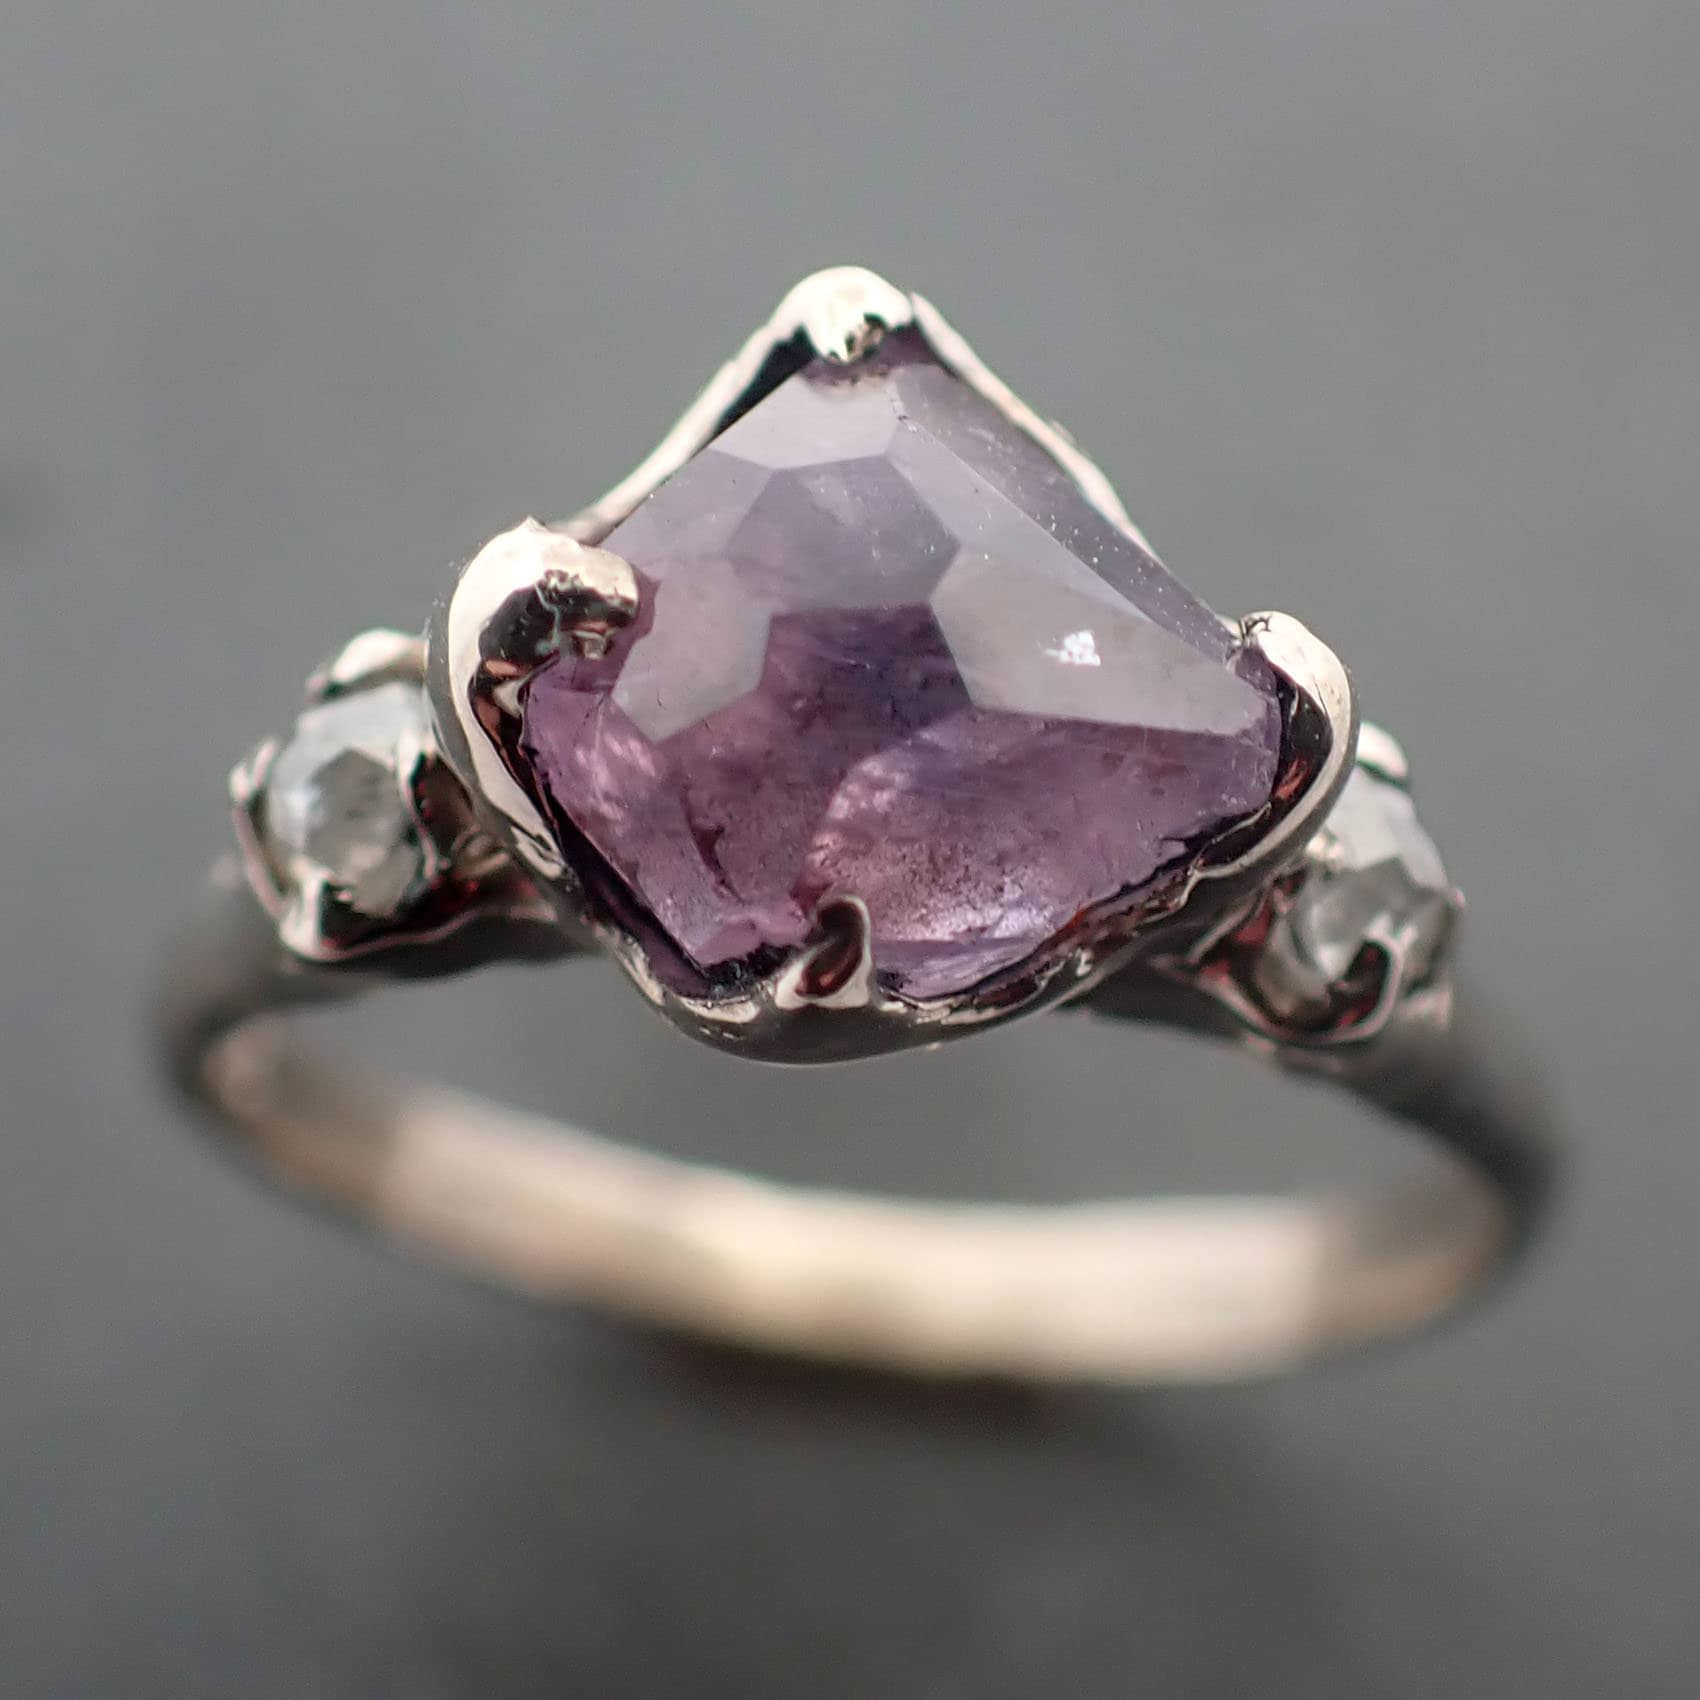 Partially Faceted Purple Sapphire with side diamonds Multi stone 14k White Gold Engagement Ring Wedding Ring Custom Gemstone Ring 3430